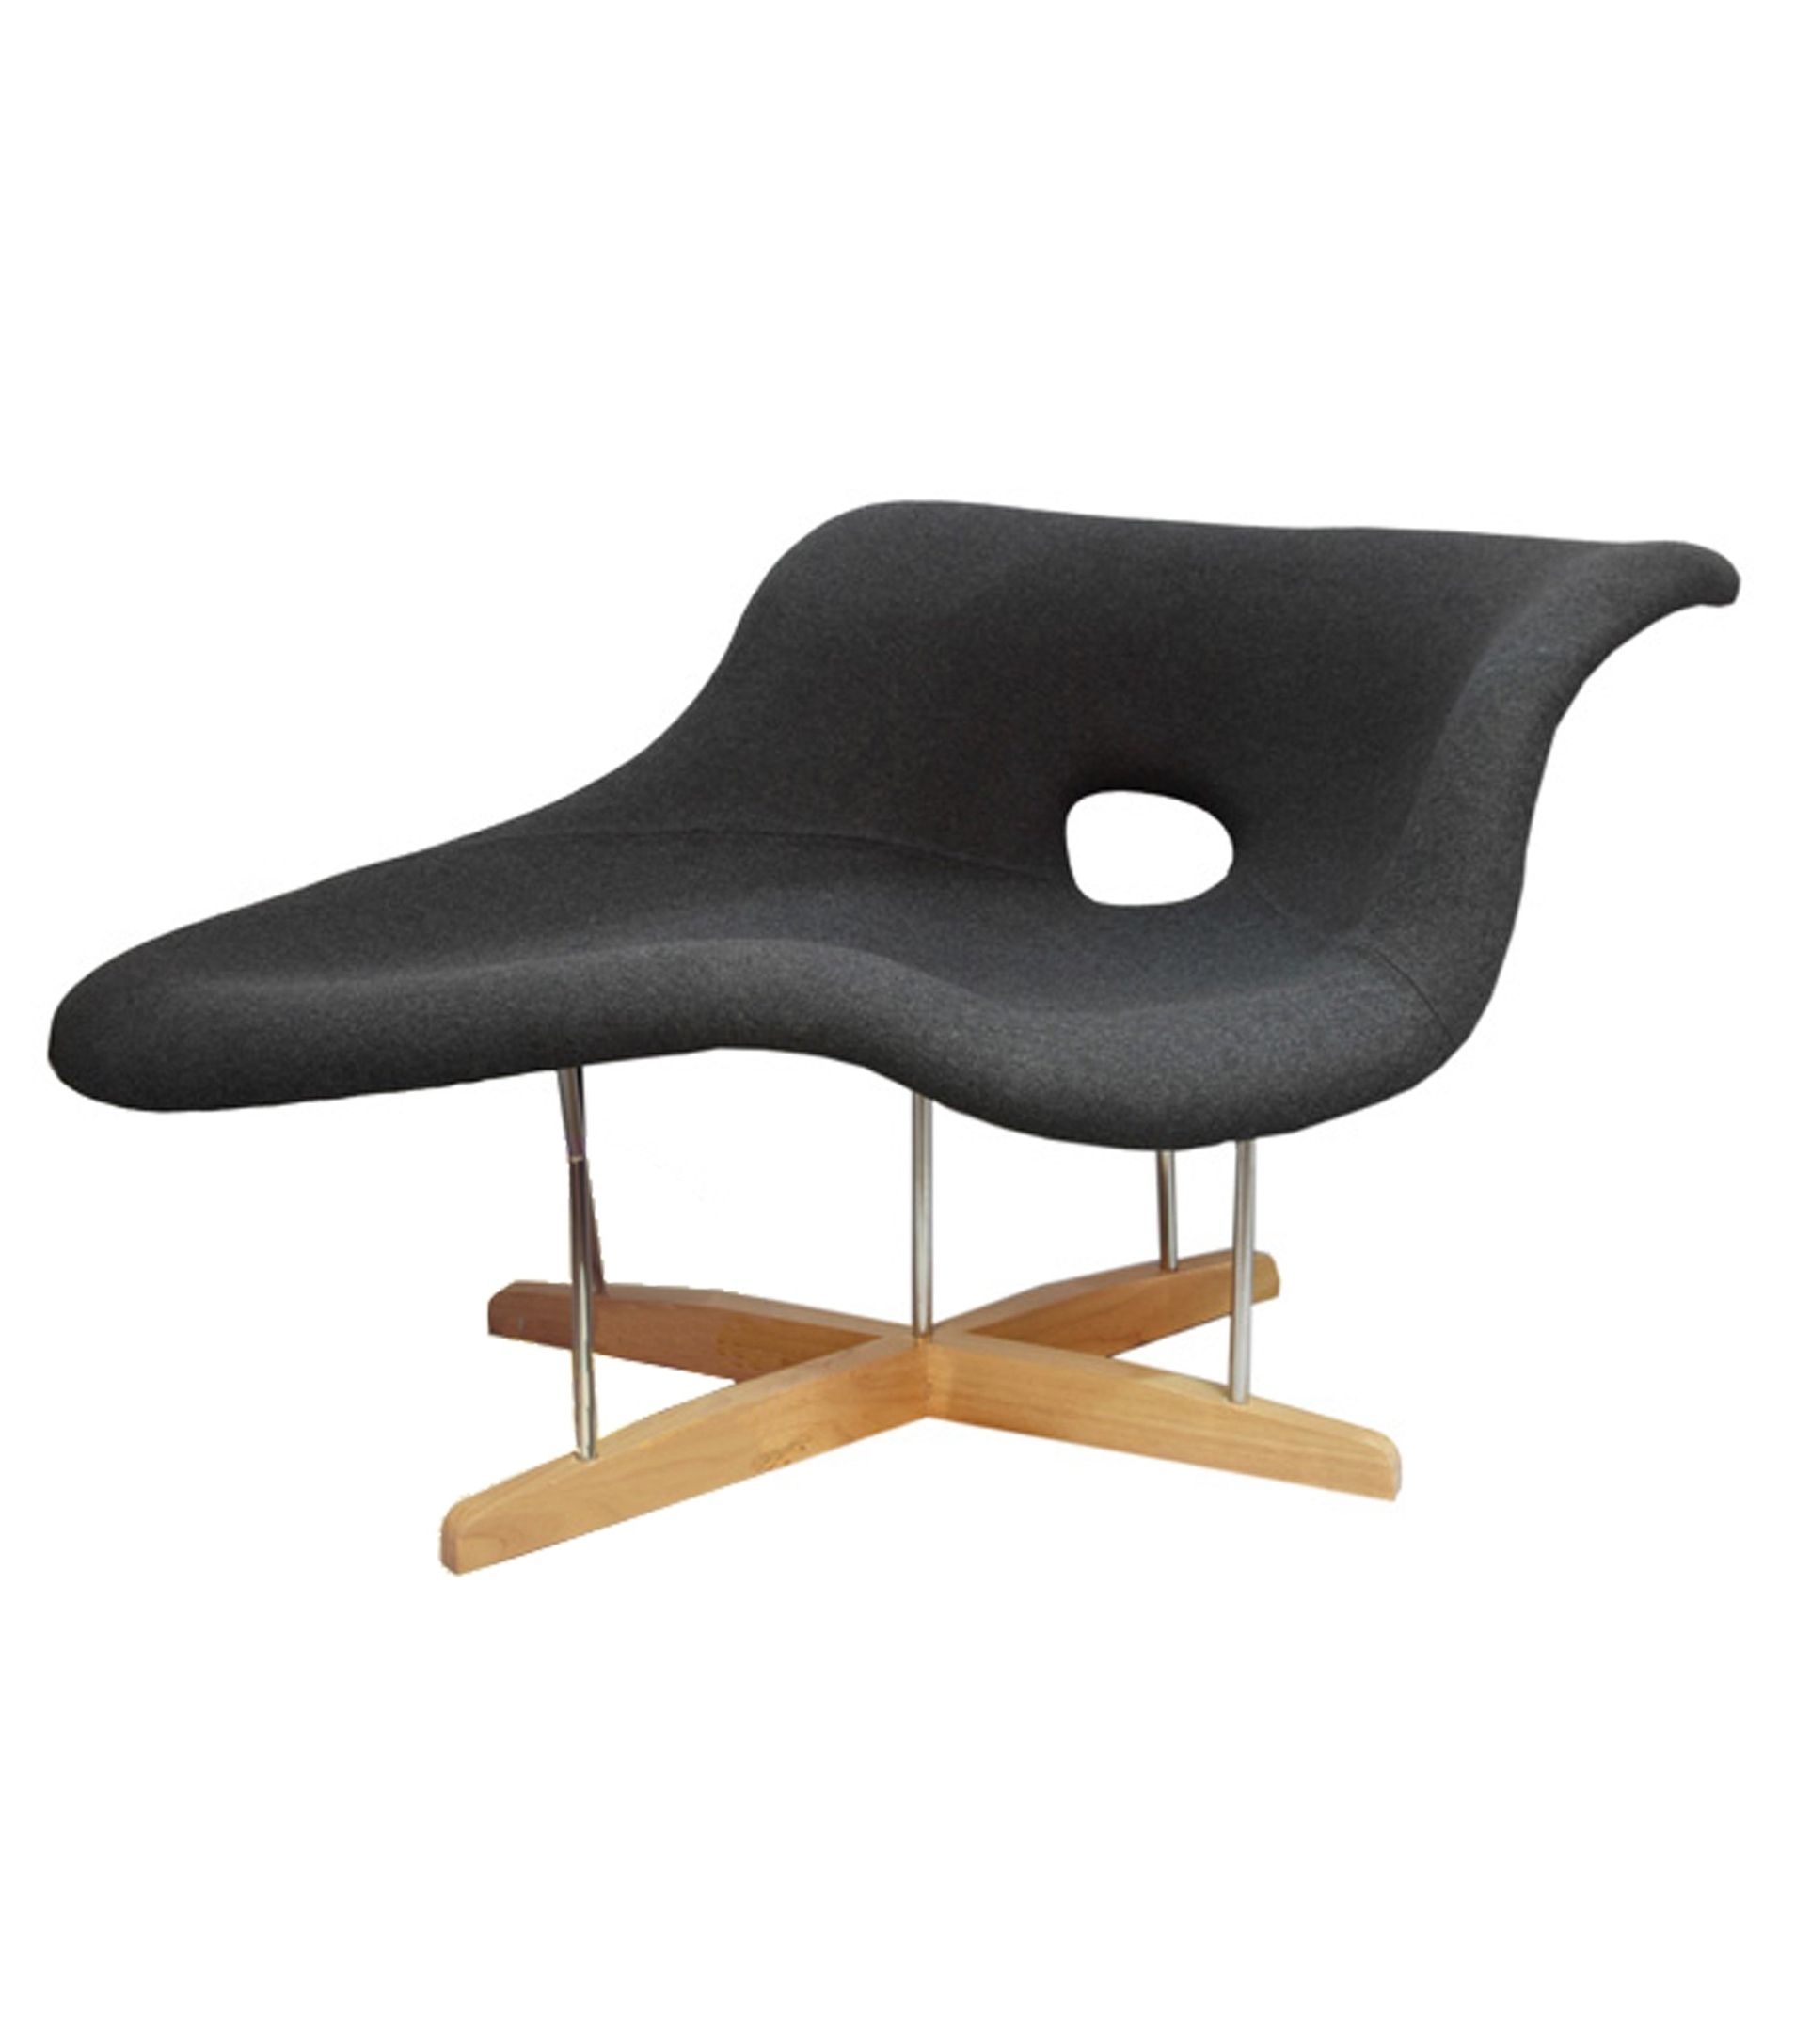 Fashionable Une Chaise Lounges Inside Chaise La – La Chaise Chaise Lounge Vitra Milia Shop, La Chaise (View 8 of 15)